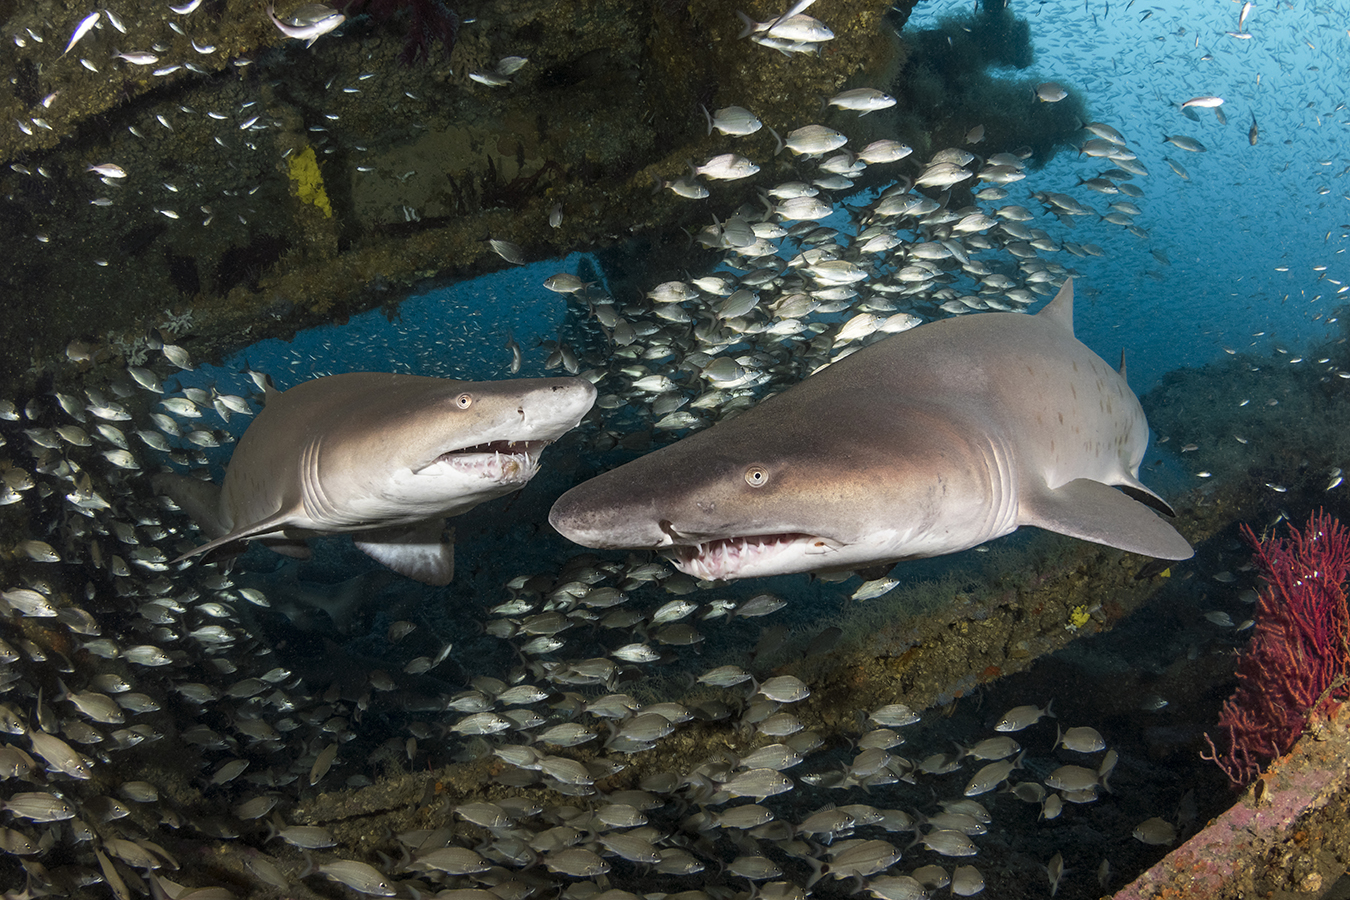 Pair of sand tiger sharks (Carcharias Taurus), on the wreck of the Caribsea off North Carolina.